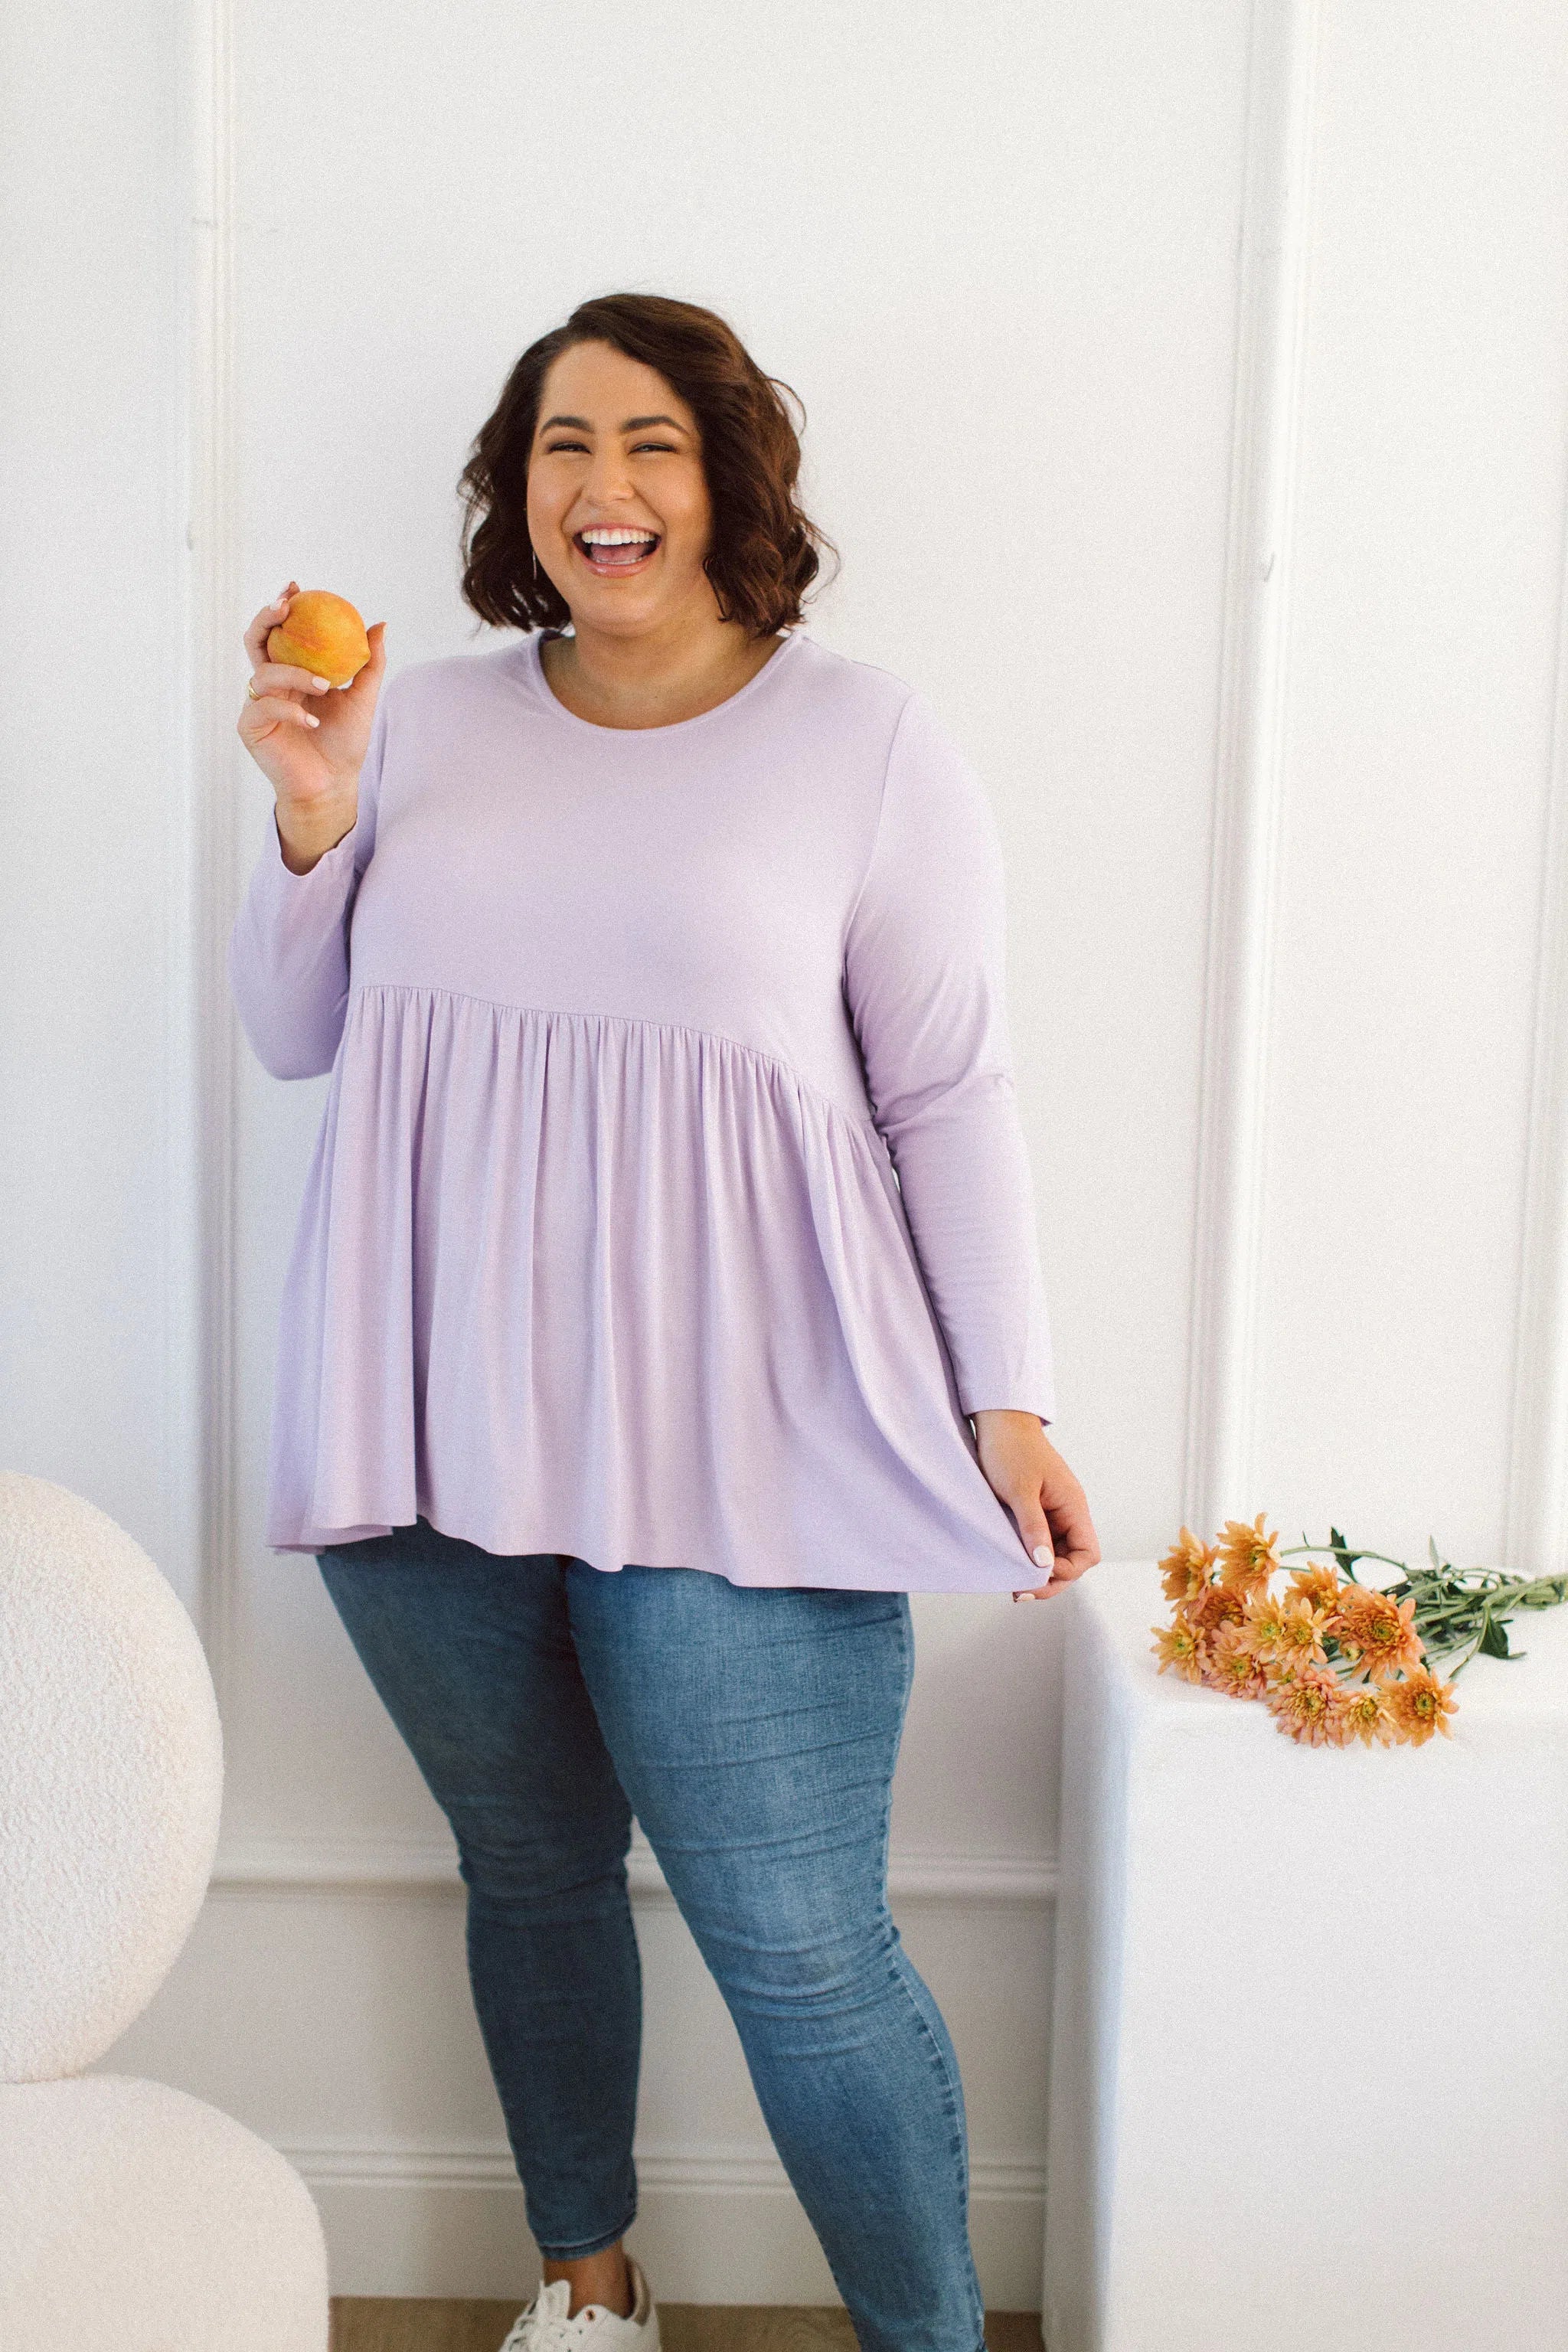 Plus Size clothing,  women modeling a Womens Plus Size Tops, Lucy Long Sleeve Top in Purple Lilac